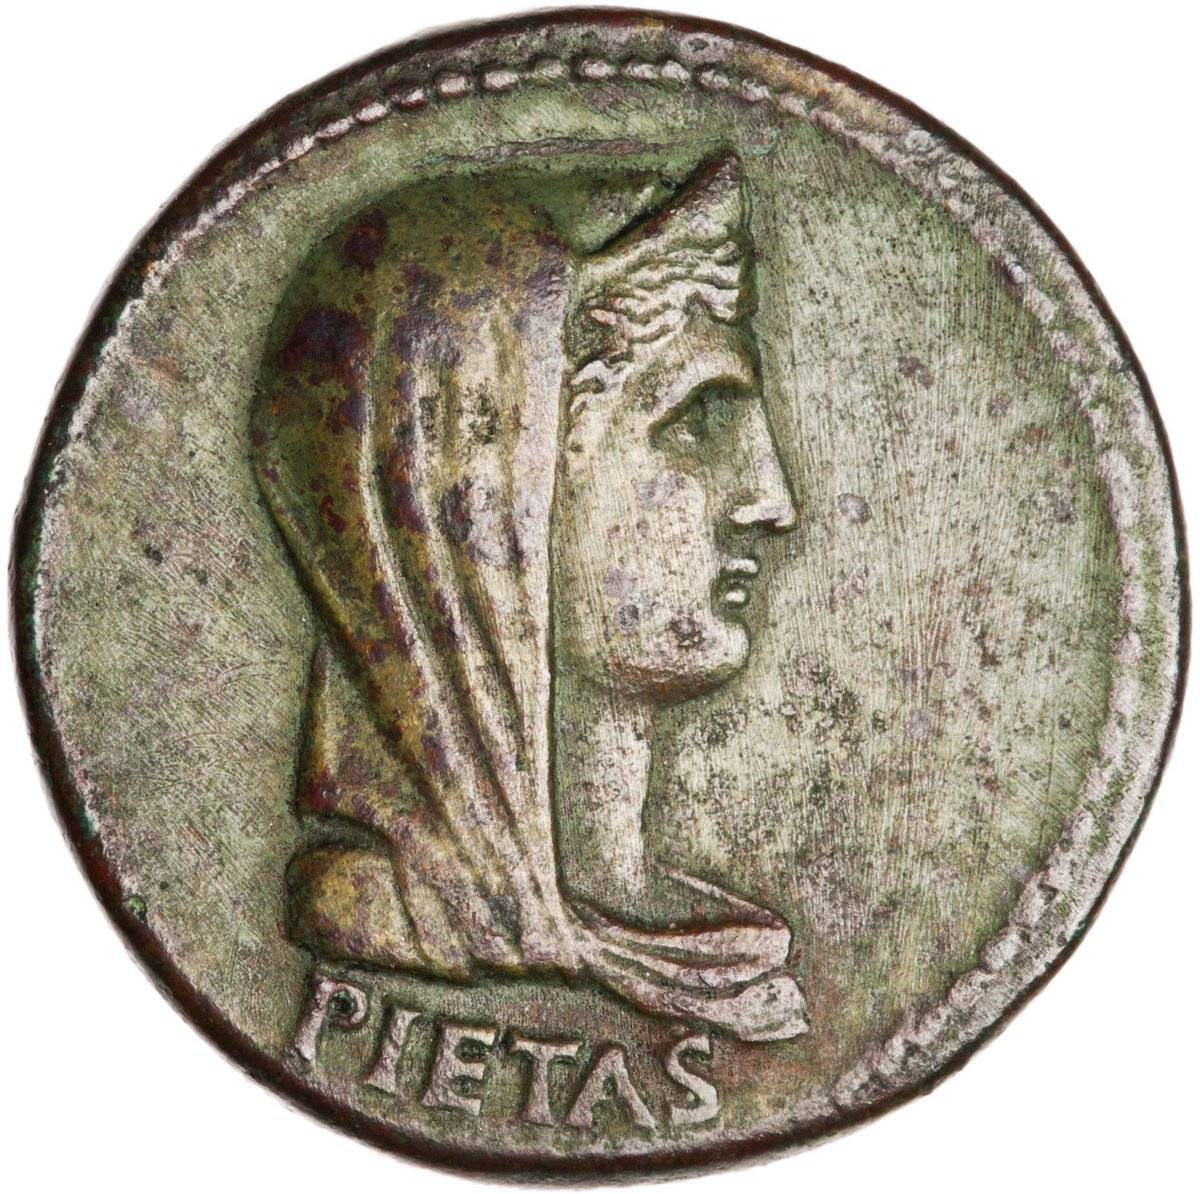 Titus too would use the image of Livia as the personification of key Roman concepts, as on this bronze dupondius of AD 80-81, again reflecting her continued significance to imperial 'auctoritas'.Image: RIC 2.1 Titus 426; ANS 1944.100.41827. Link -  http://numismatics.org/ocre/id/ric.2_1(2).tit.426